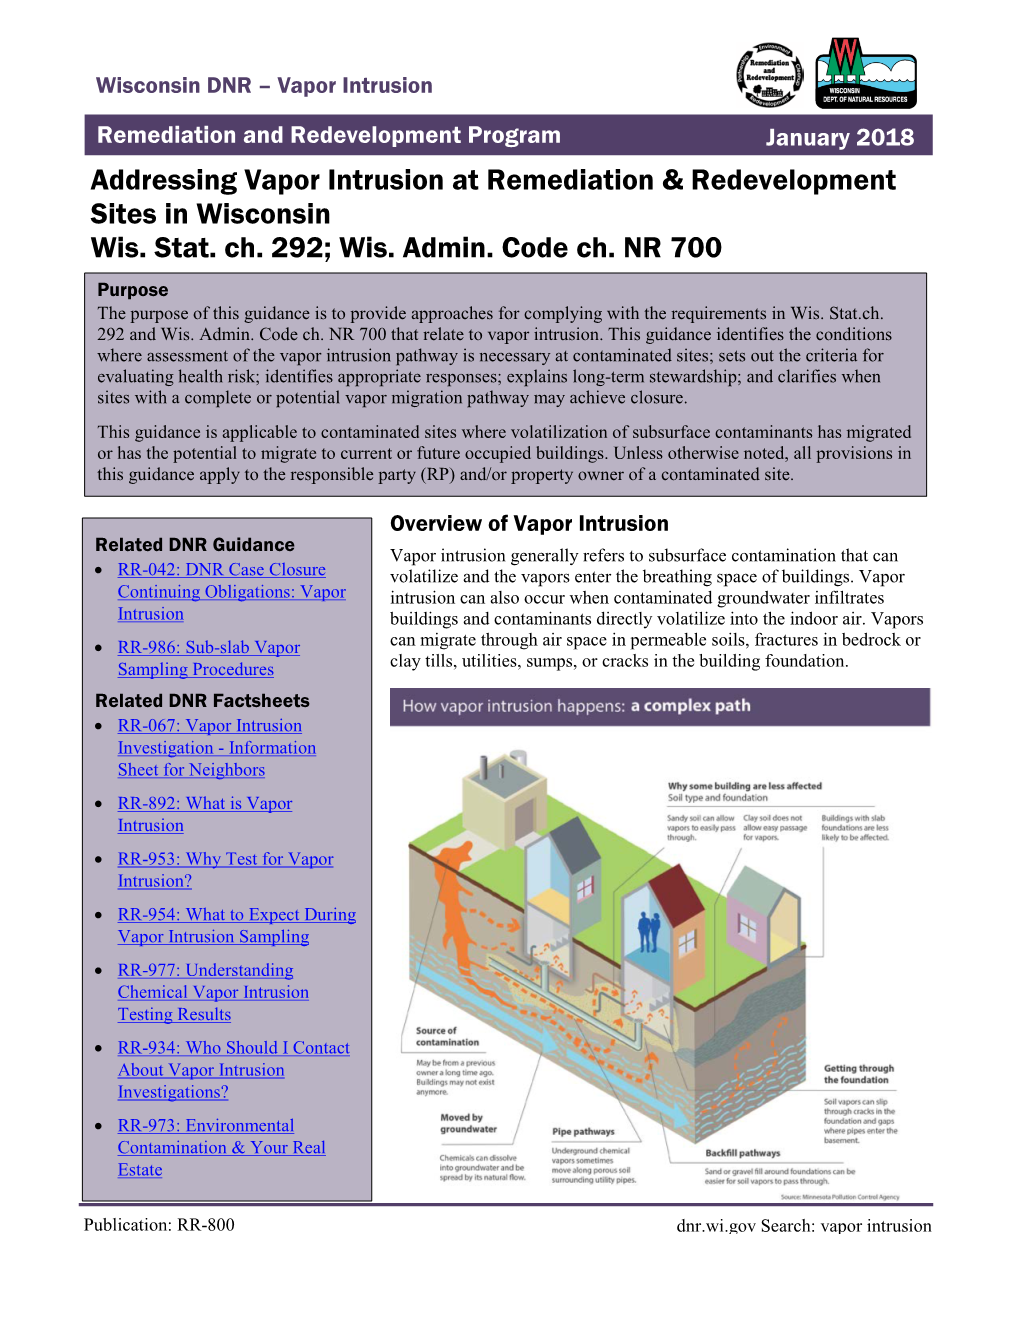 Addressing Vapor Intrusion at Remediation and Redevelopment